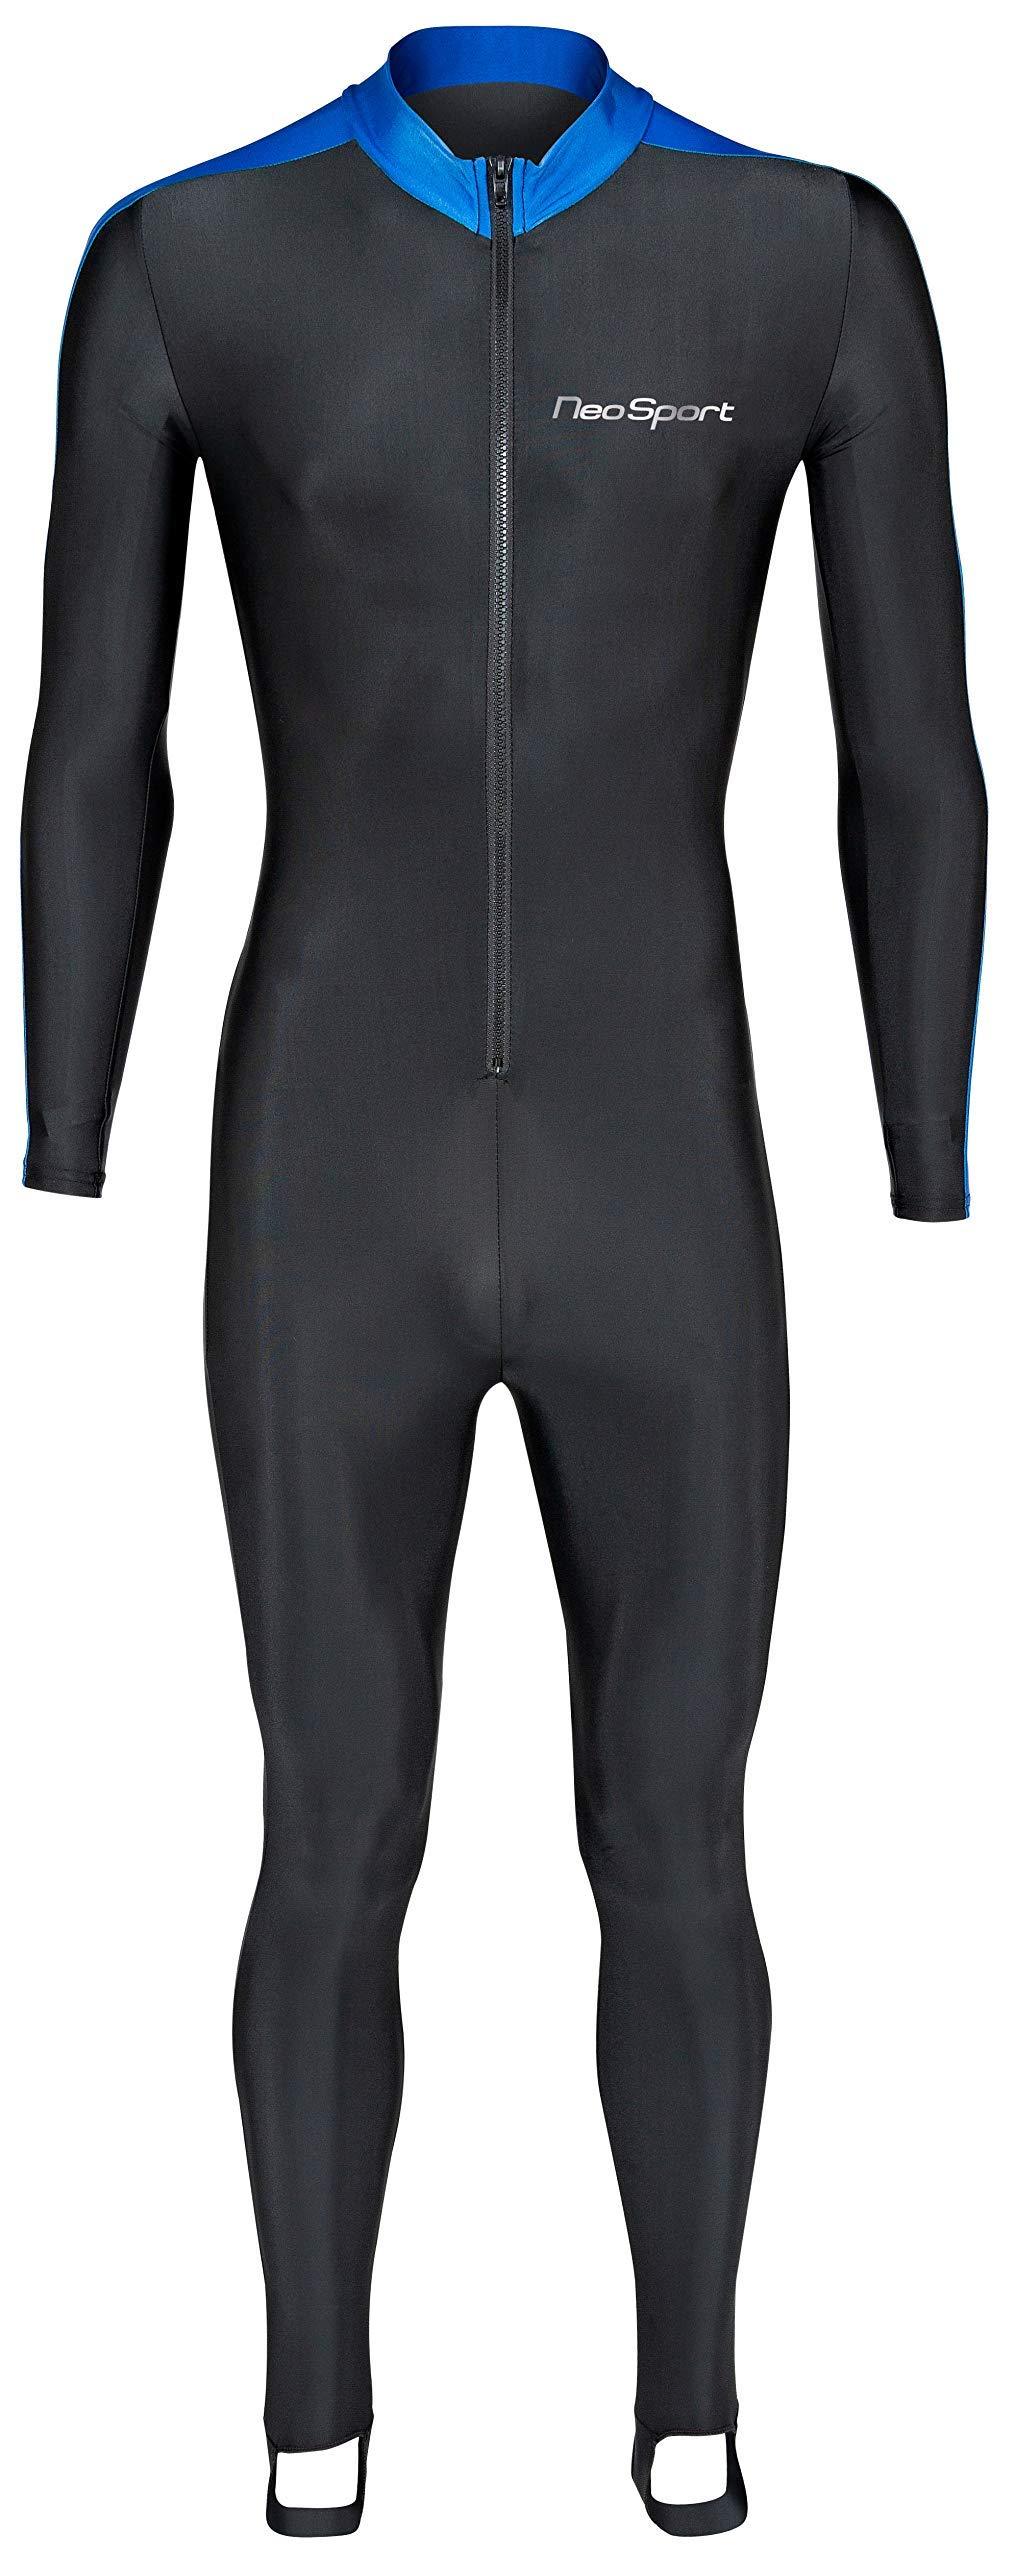 [AUSTRALIA] - NeoSport Full Body Long Sleeve Lycra Sports Suit for Women and Men – Helps Protect Against UV rays and Skin Irritants - Great for Swimming, Snorkeling, Scuba Diving and All Watersports, 